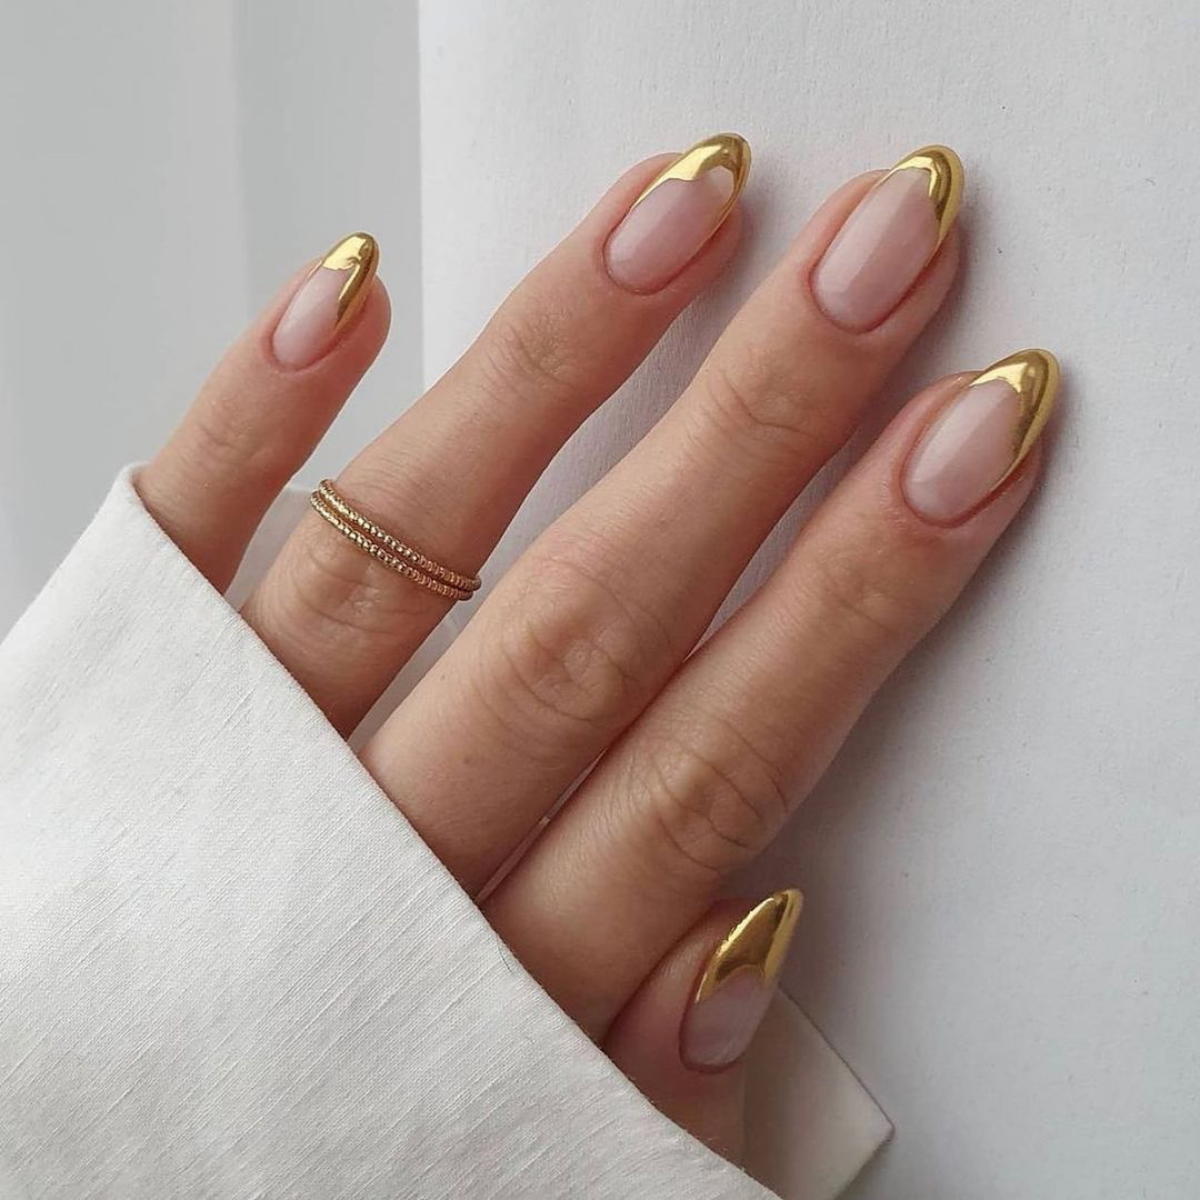 january nails gold french tip